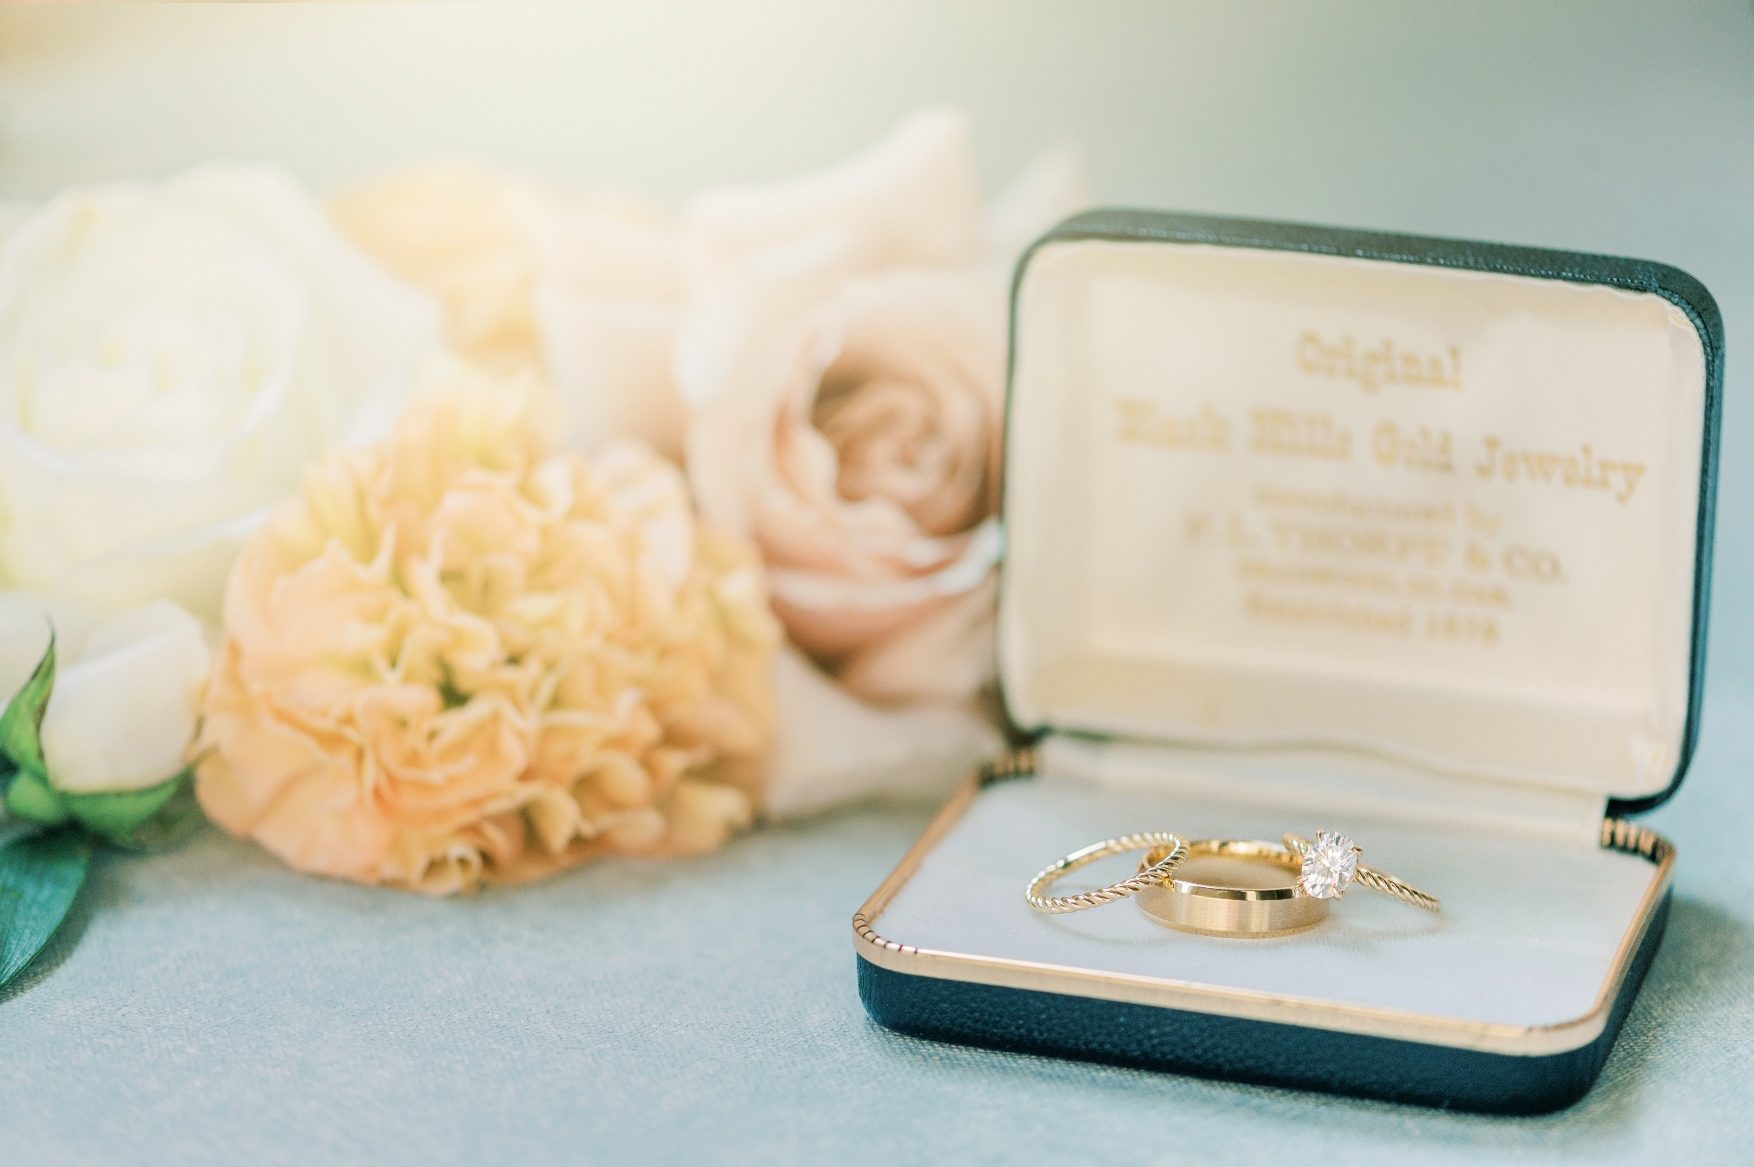 A second set of wedding ring and bands in a decorative jewelry box with peach and blush blooms in the background